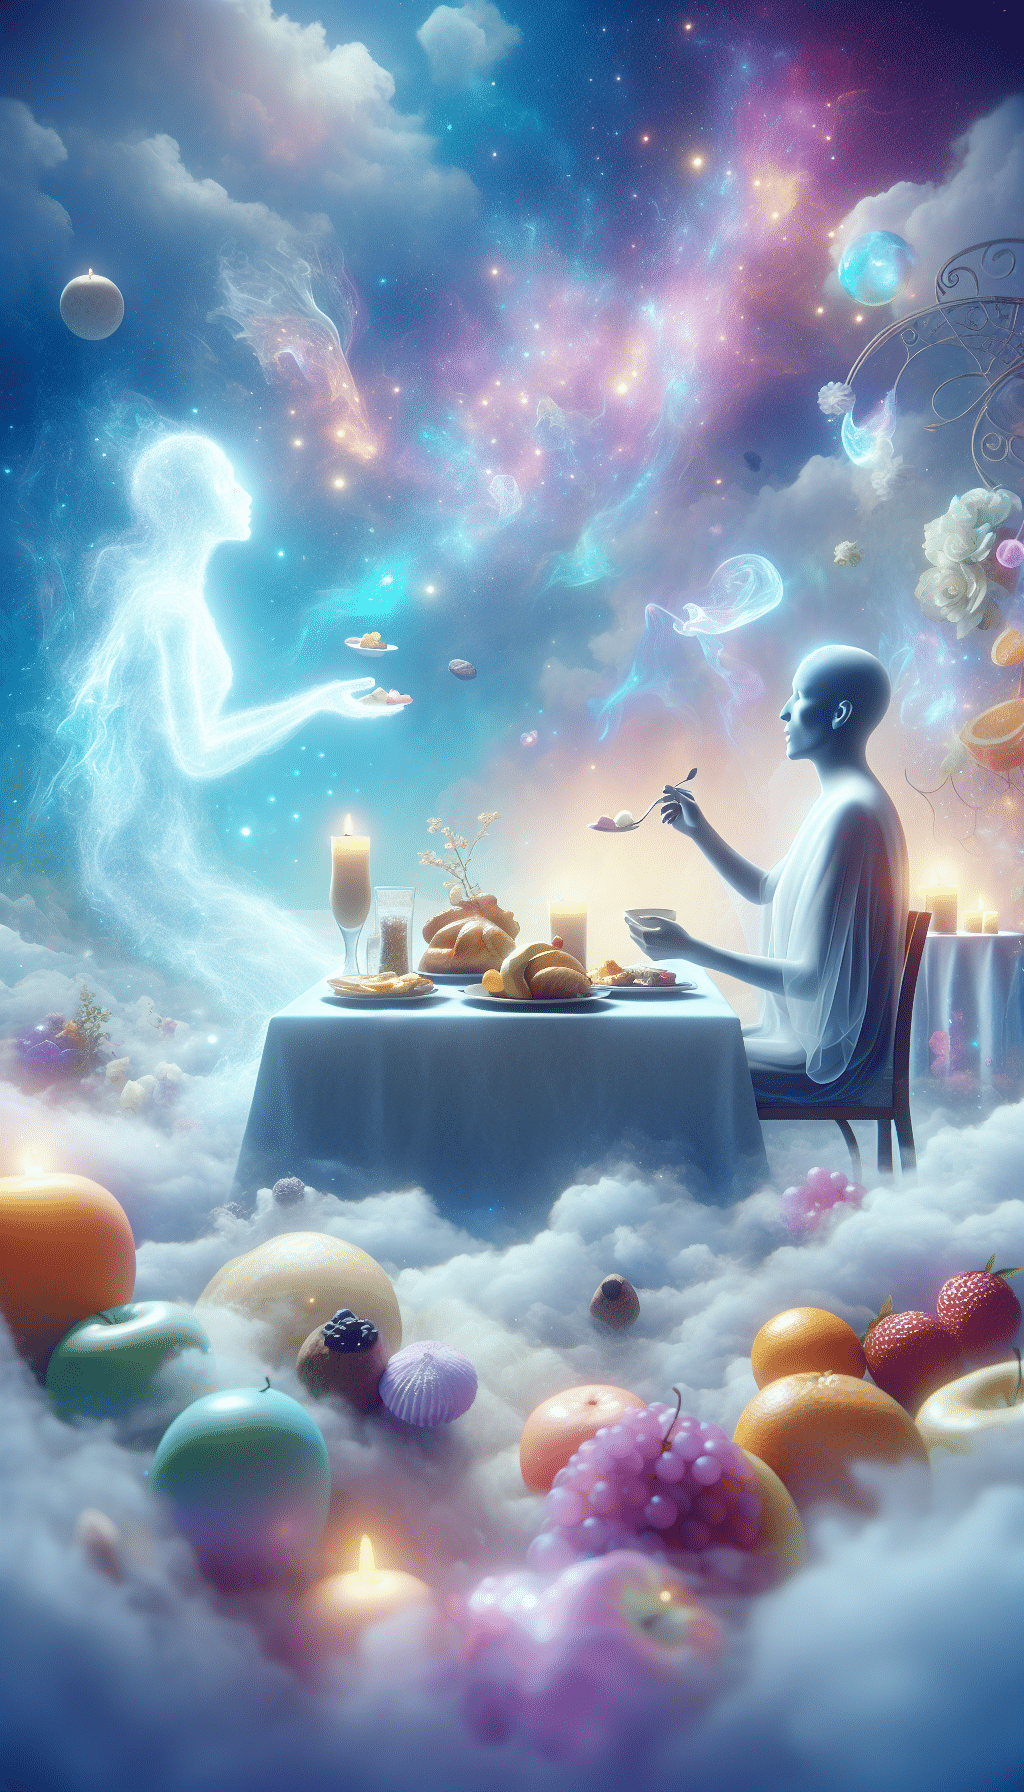 dead person eating food dream meaning